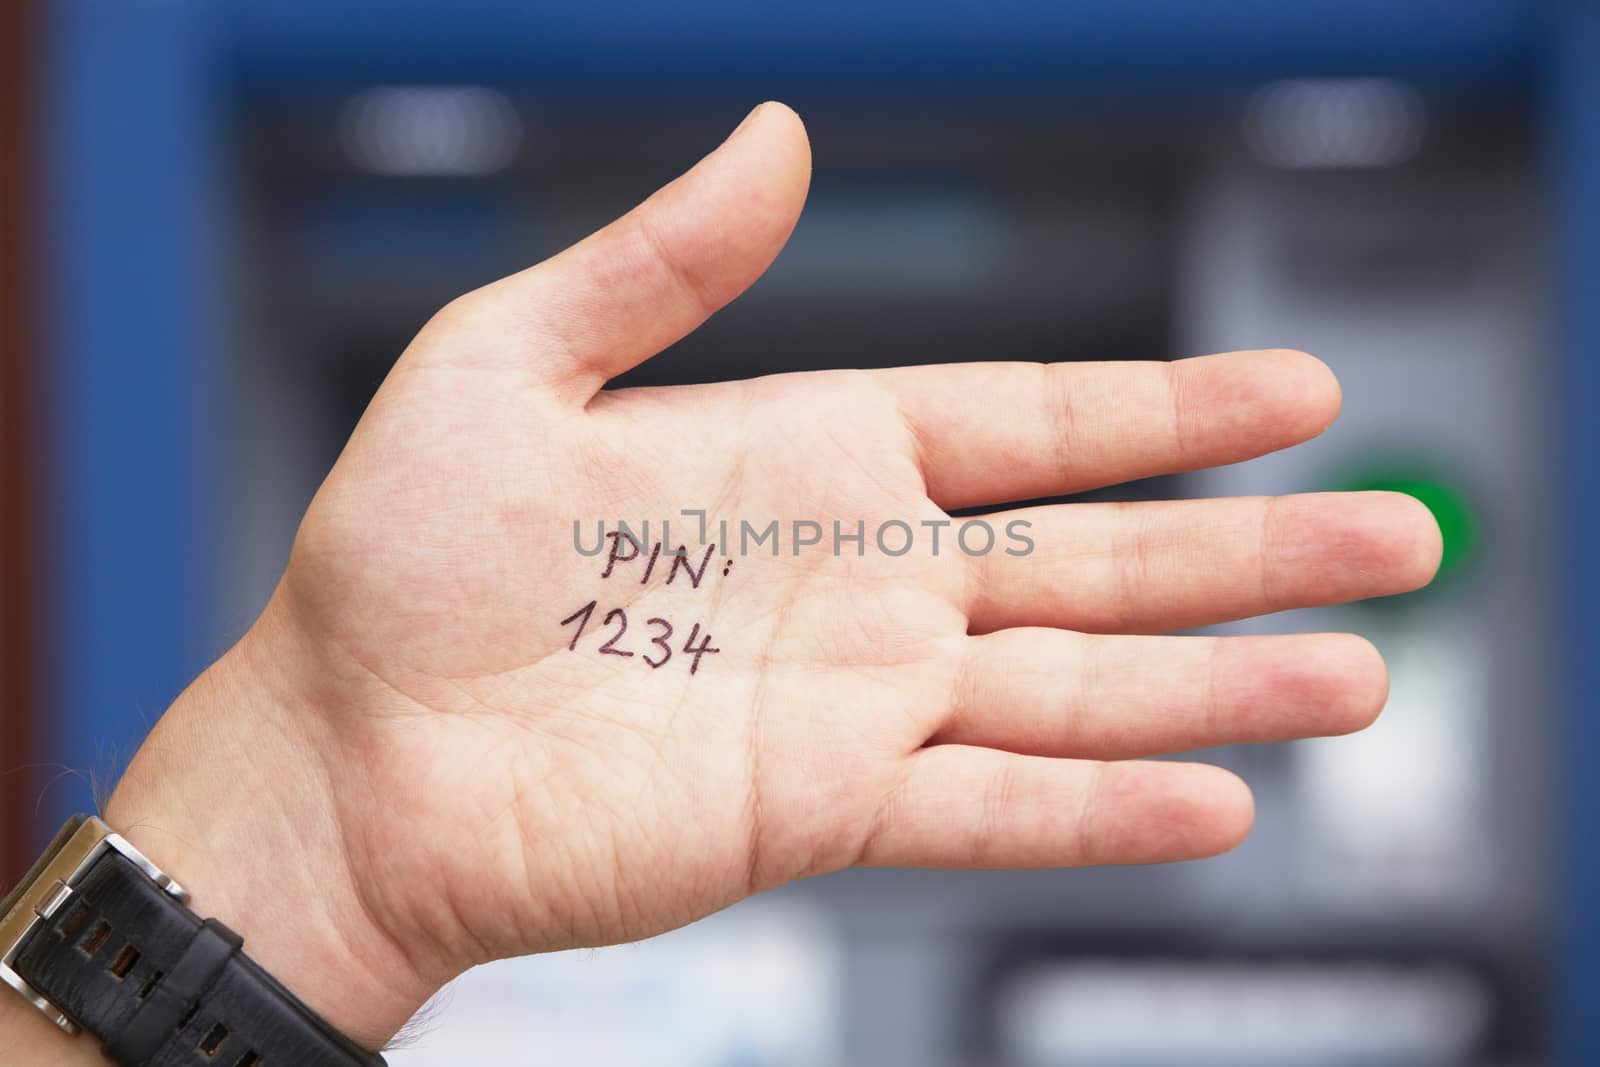 Bad idea - simple PIN code written on the palm 